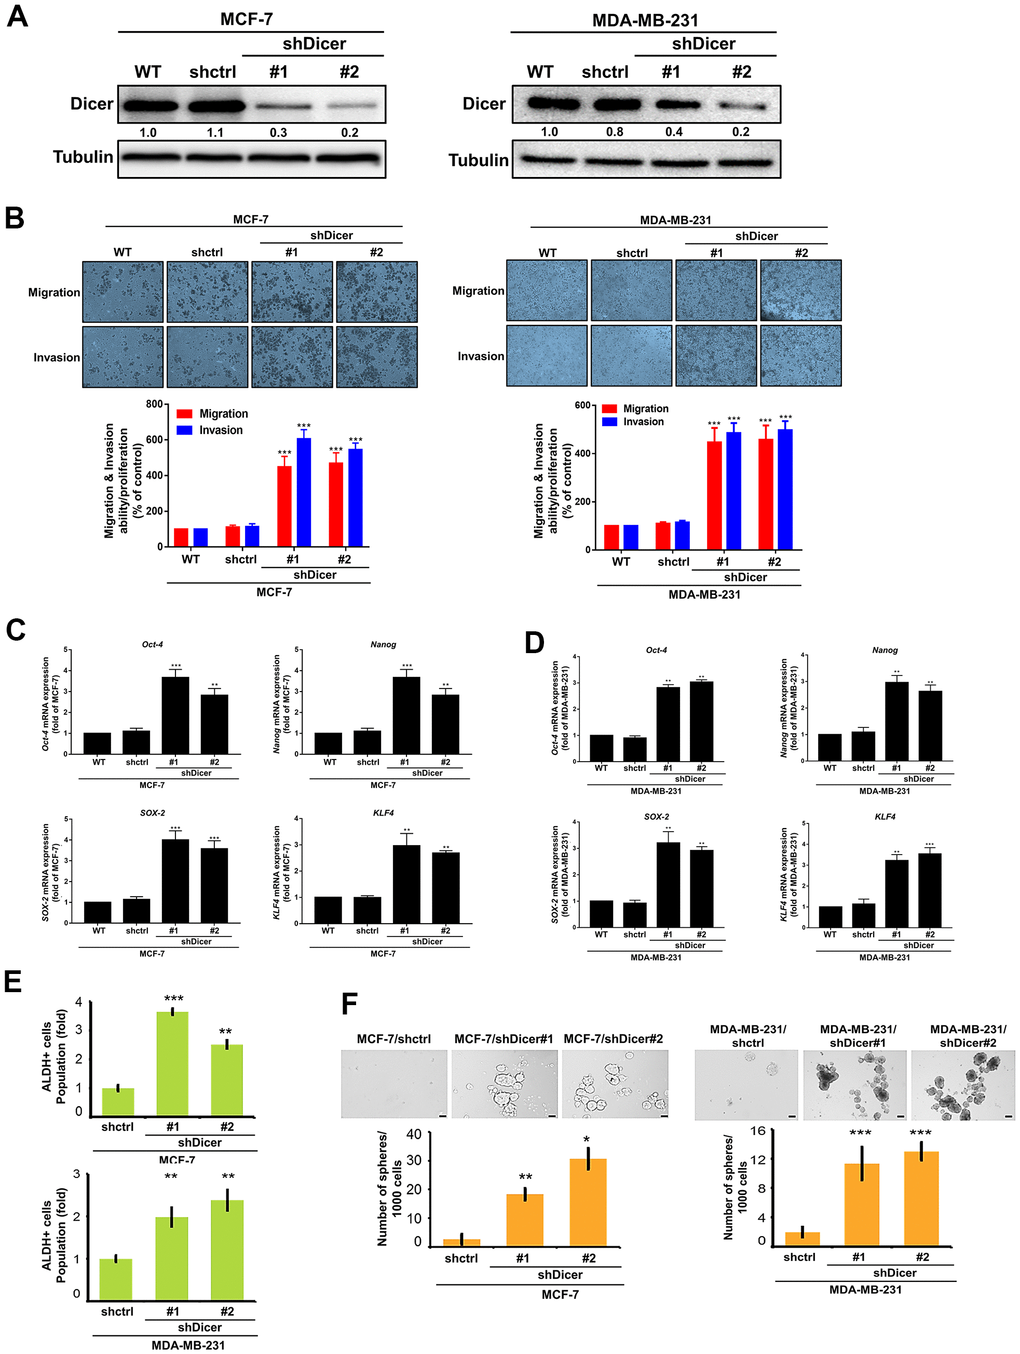 Dicer silencing enhances the migration/invasion, and CSCs properties of breast cancer cells. (A) The stable Dicer-silenced MCF-7 and MDA-MB-231 cells were analyzed through Western blotting. (B) The migration and invasion of the stable knockdown breast cancer cells were evaluated by performing cell migration and invasion assays, respectively. (C, D) qRT-PCR analysis of Oct-4, Nanog, SOX-2, and KLF4 in Dicer-knockdown MCF-7 and MDA-MB-231 cells. (E) Analysis of ALDH activity through flow cytometry to determine the subpopulation of CSCs properties. (F) Sphere formation assay to evaluate self-renewal and differentiation at the single-cell level in vitro in the present cells. Data are presented as the mean ± standard error mean of three independent experiments. *P 